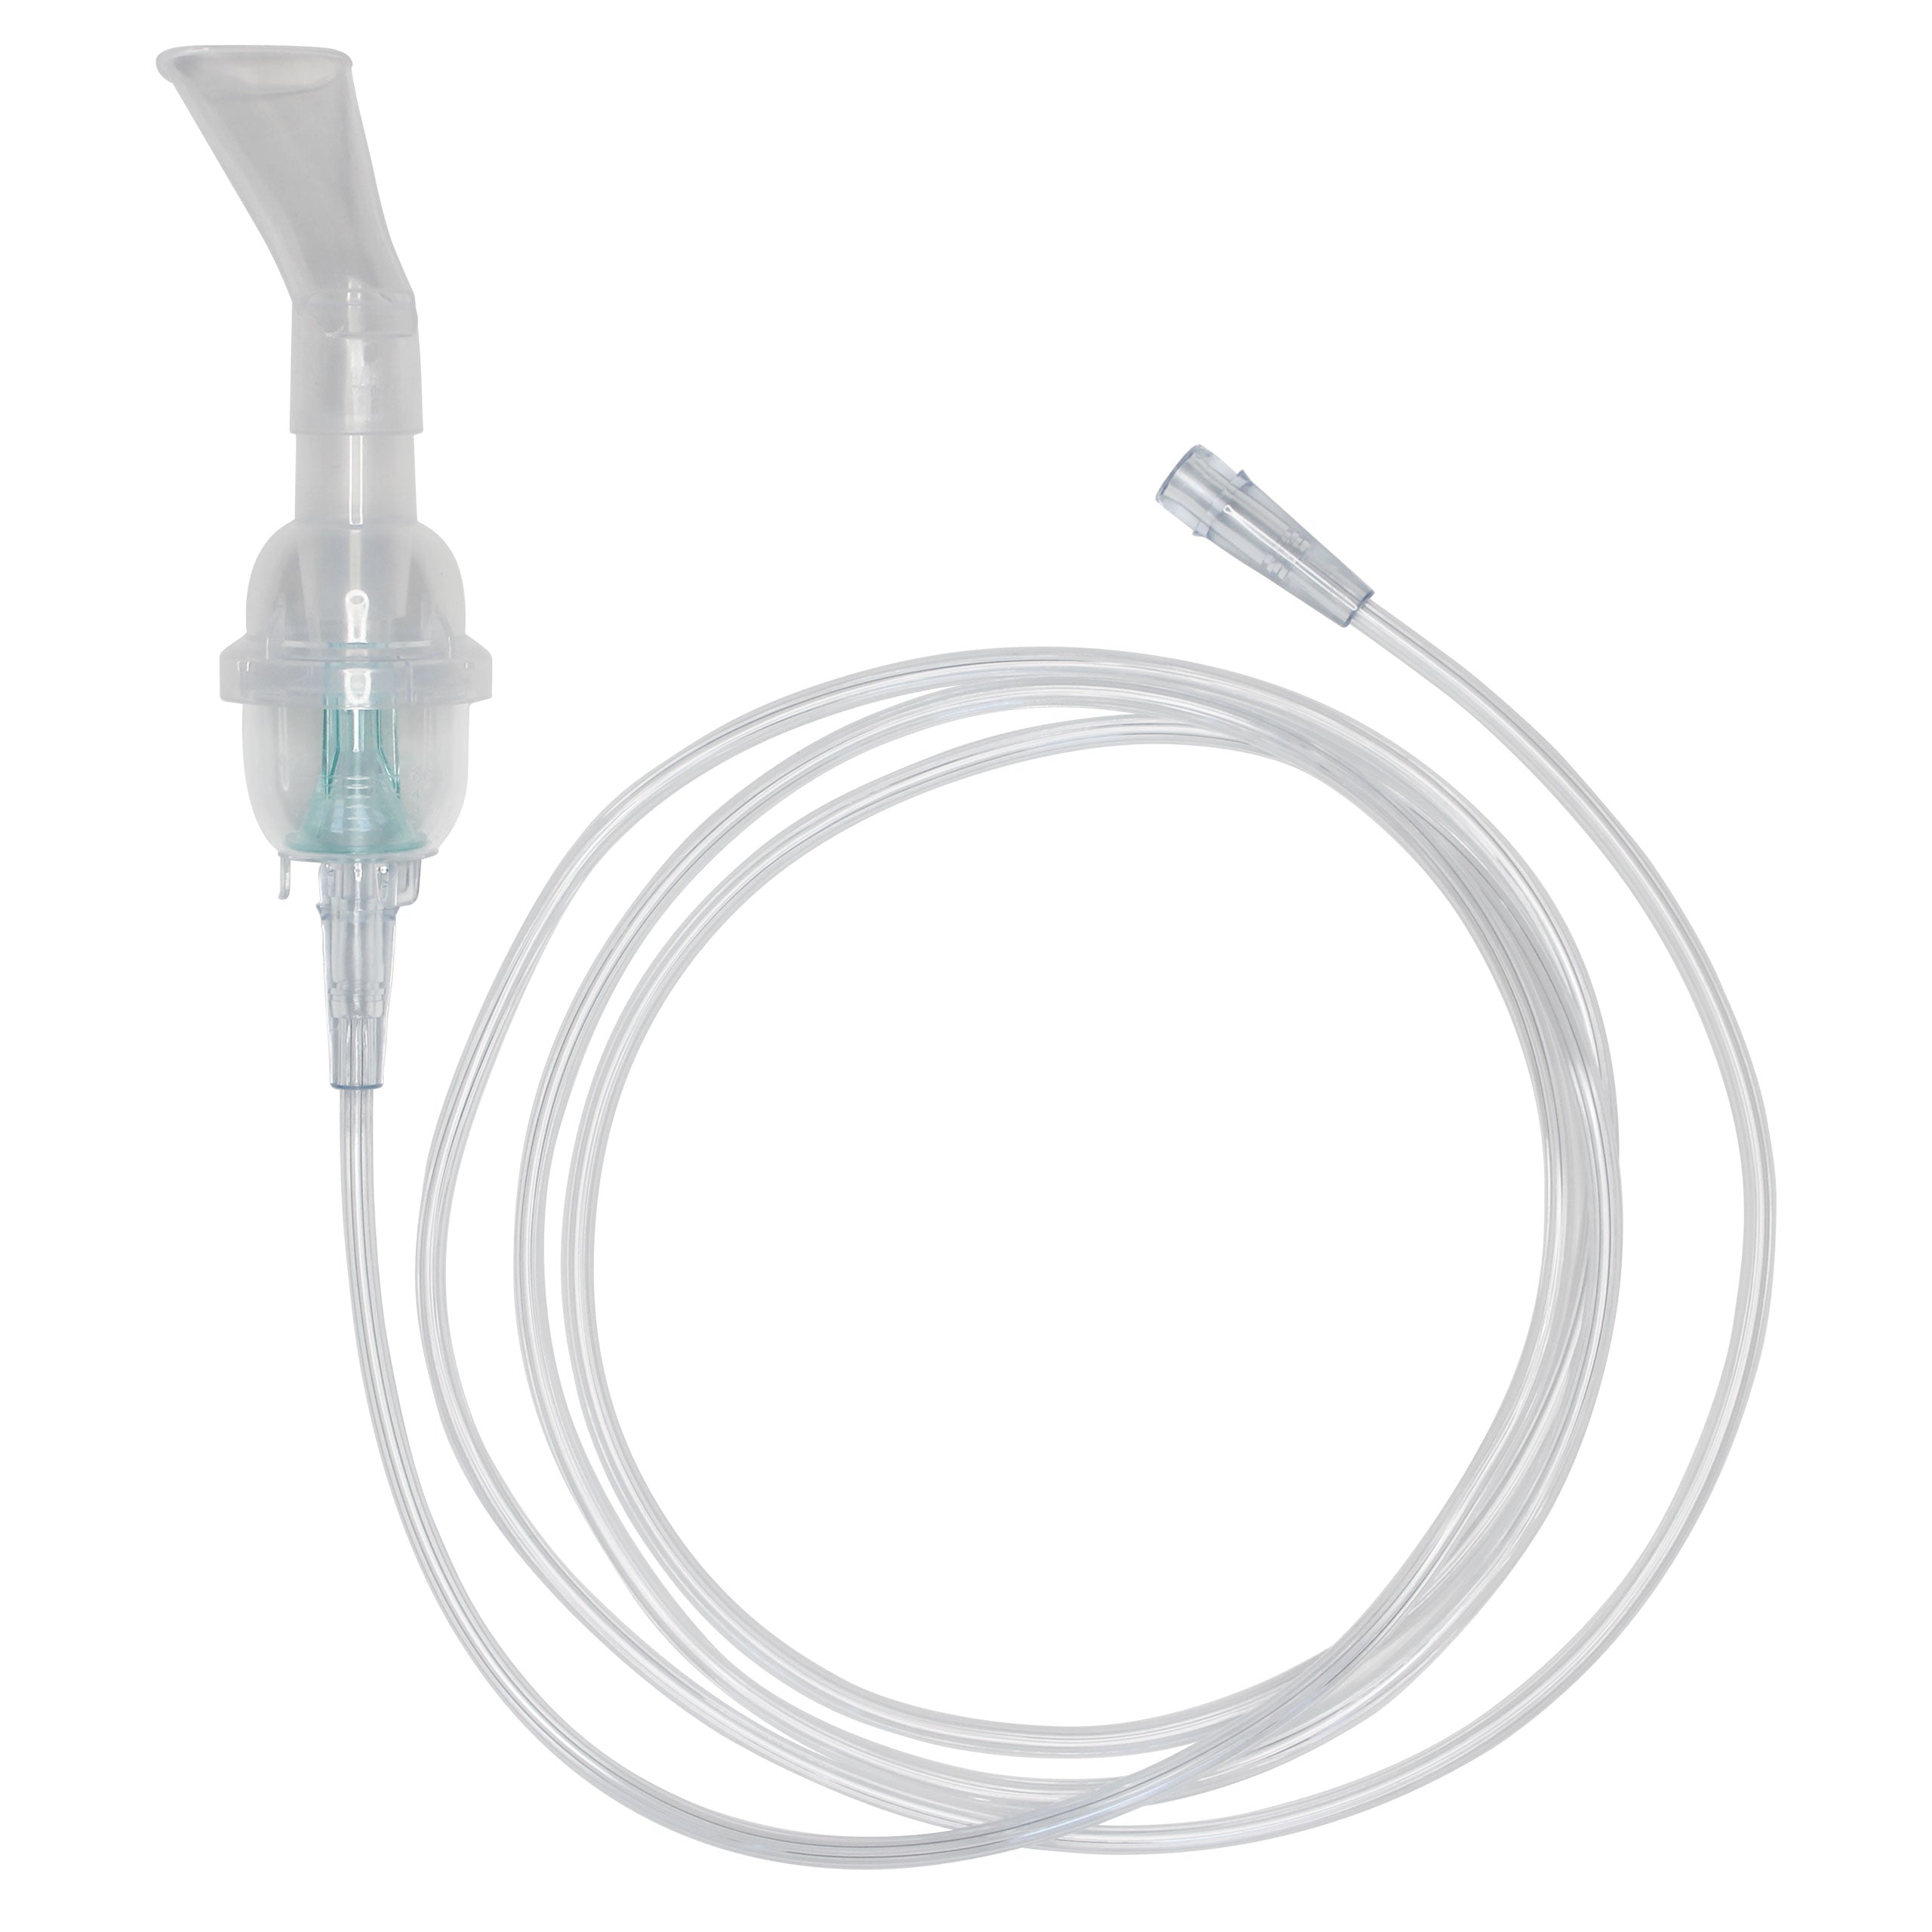 Sunset Disposable Nebulizer Kit with Angled Mouthpiece & 7 Foot Tubing